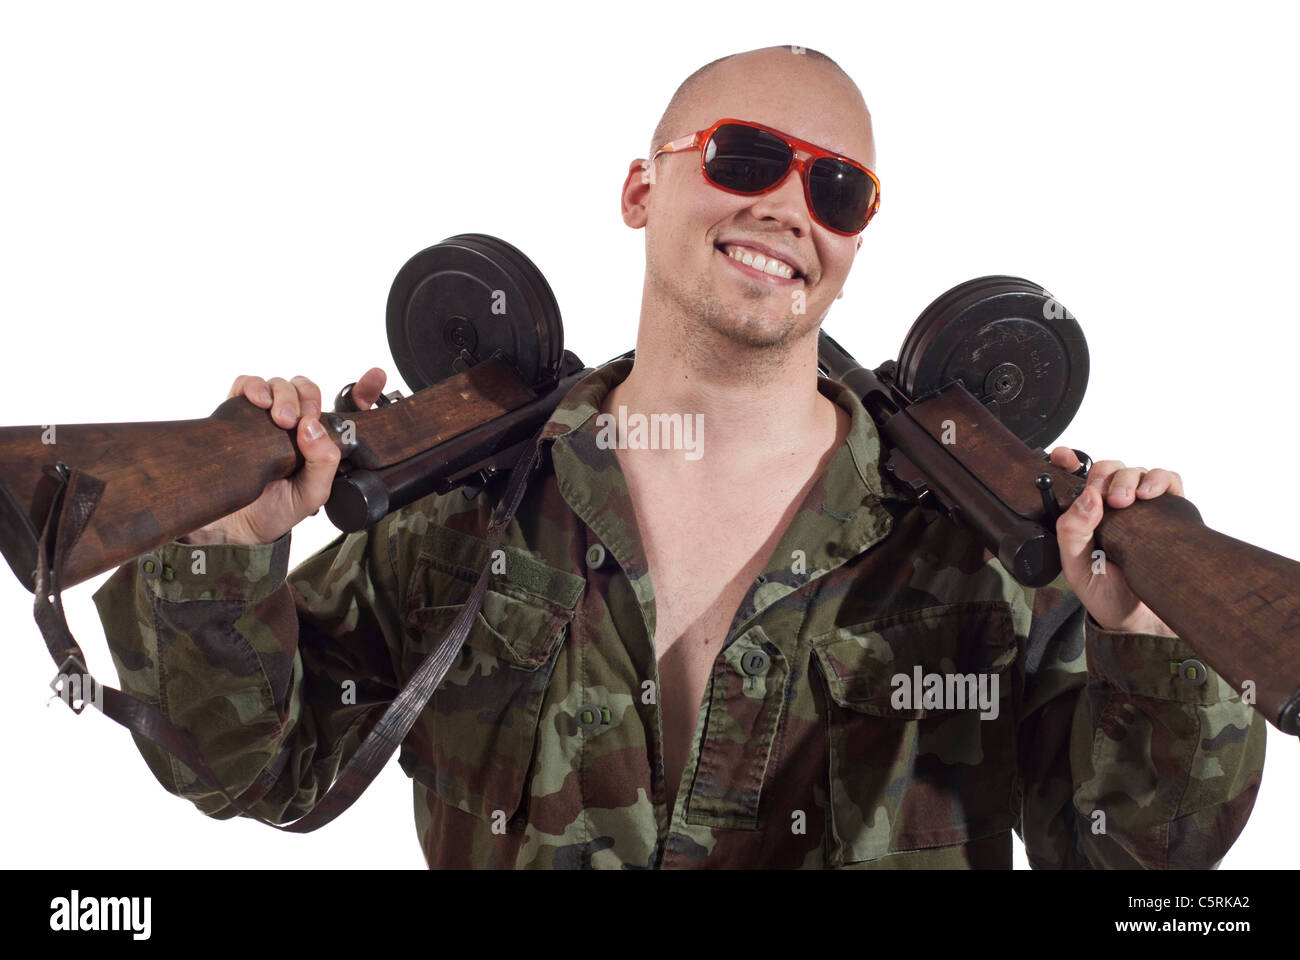 Smiling soldier with sunglasses and two machine guns. Stock Photo